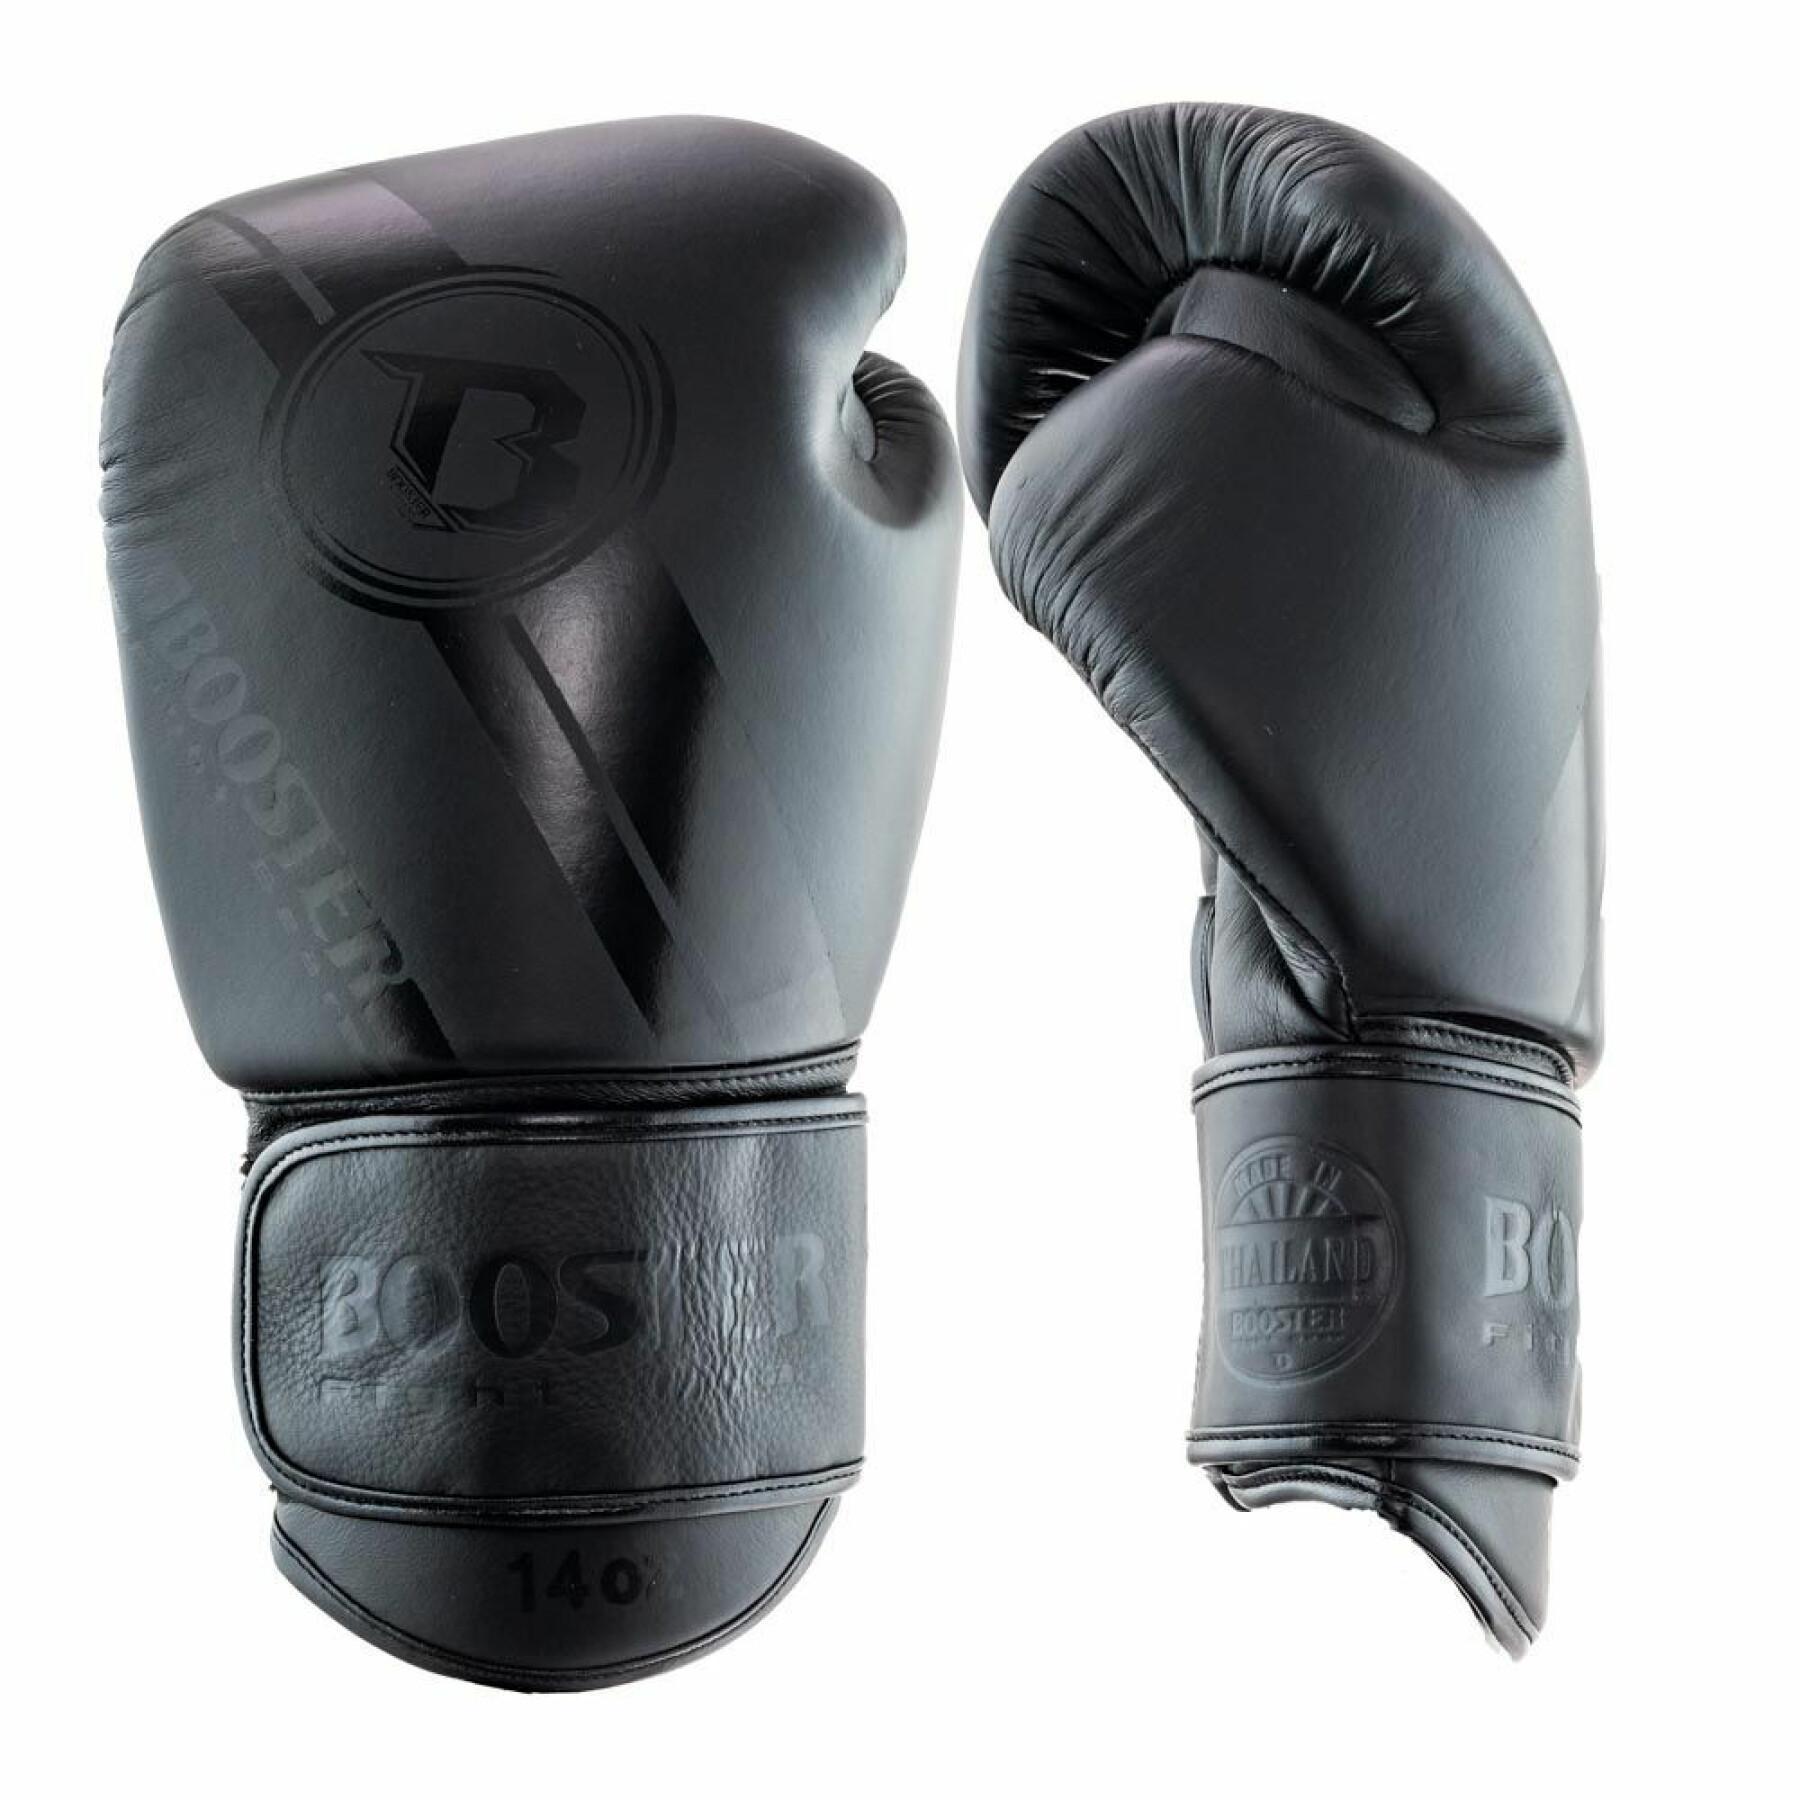 Boxing gloves Booster Fight Gear Pro Bgl V3